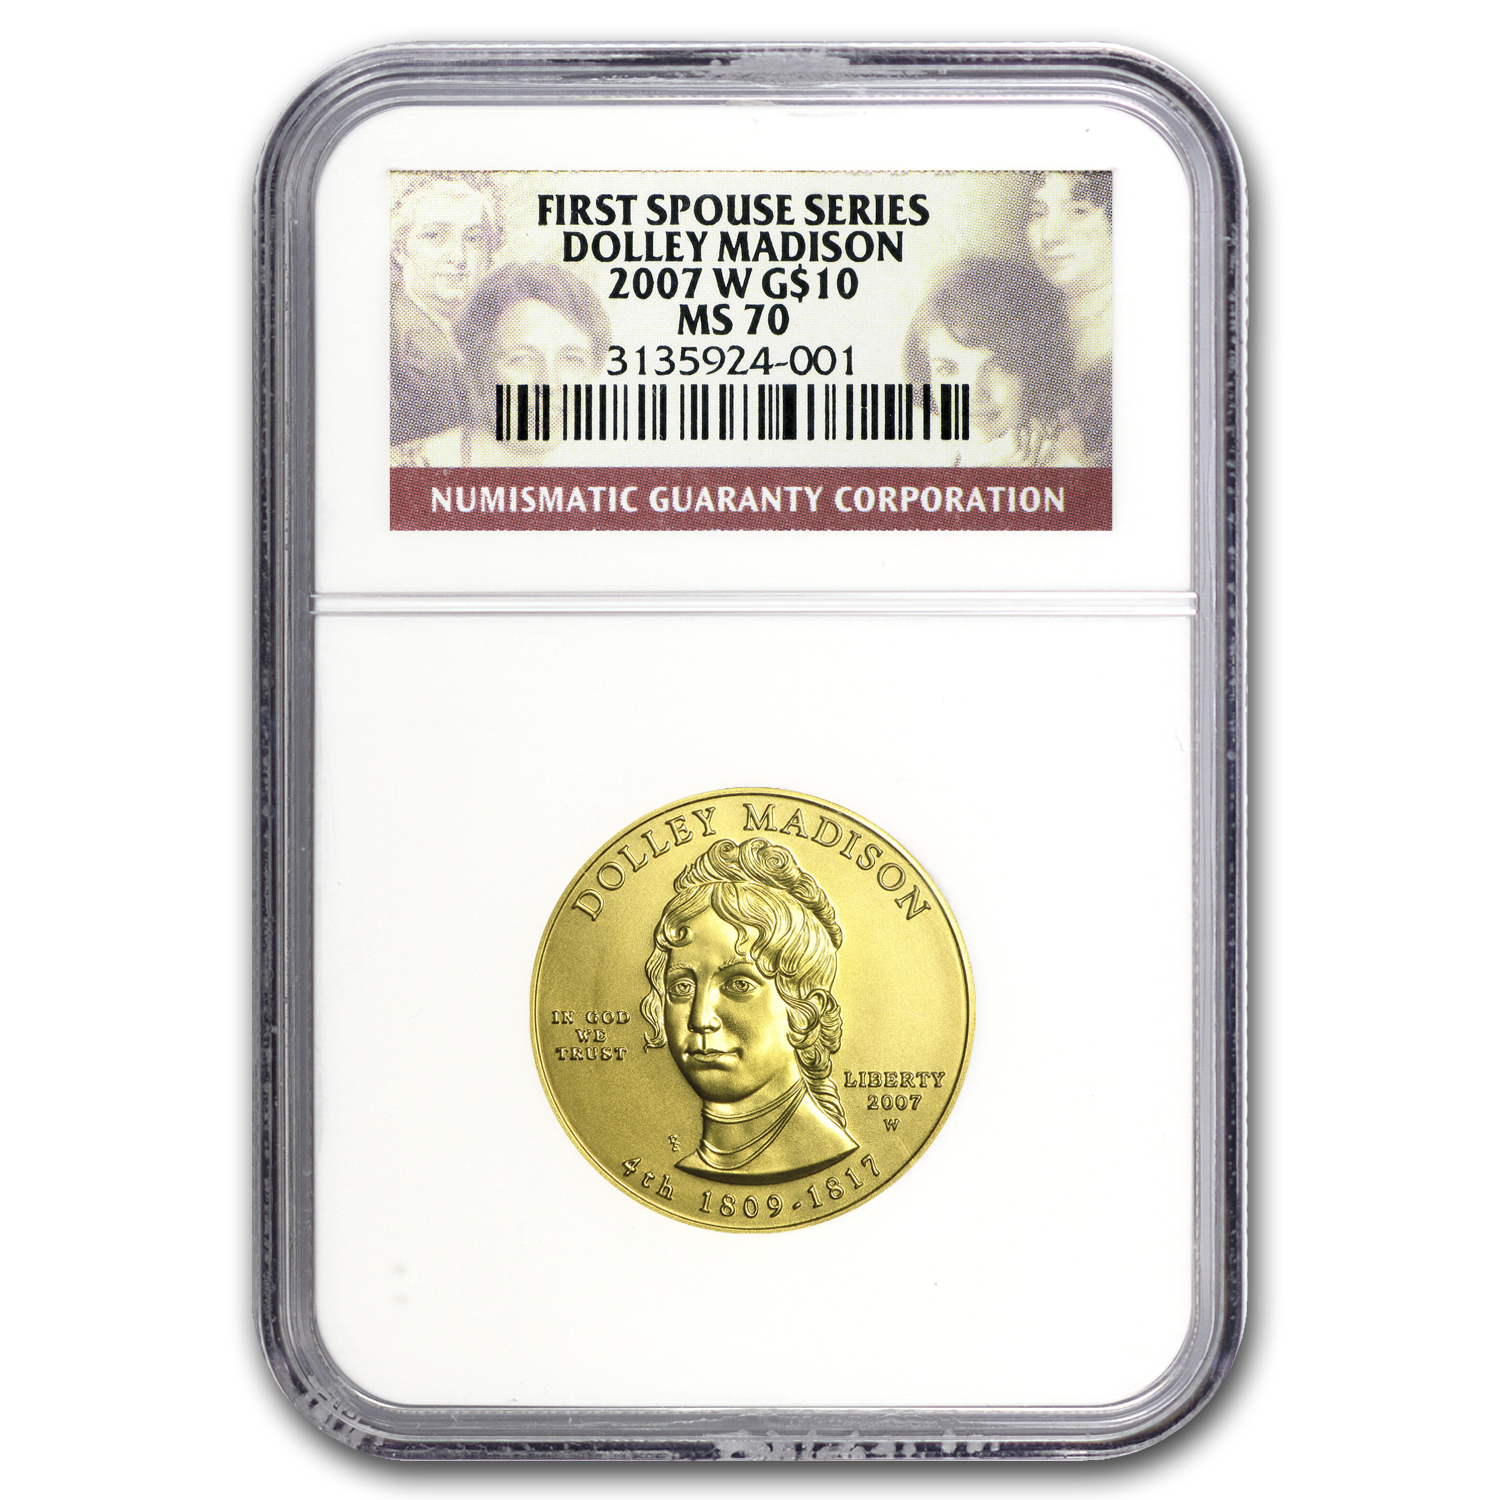 Buy 2007-W 1/2 oz Gold Dolley Madison MS-70 NGC